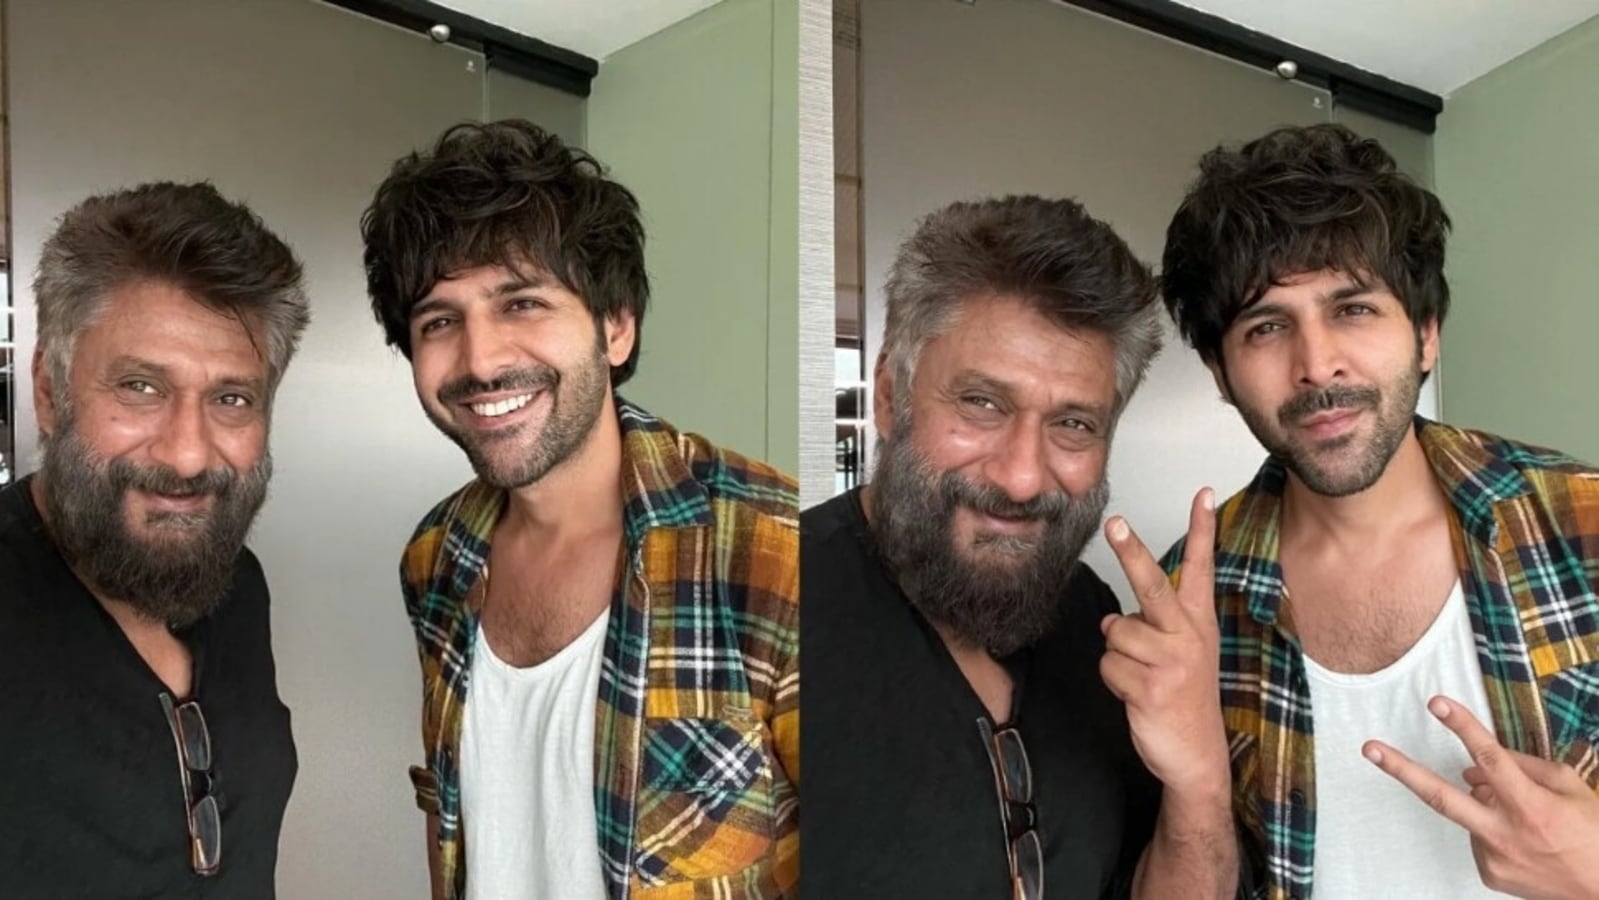 kartik-aaryan-poses-with-vivek-agnihotri-as-he-calls-them-small-town-middle-class-outsiders-made-it-on-our-own-terms